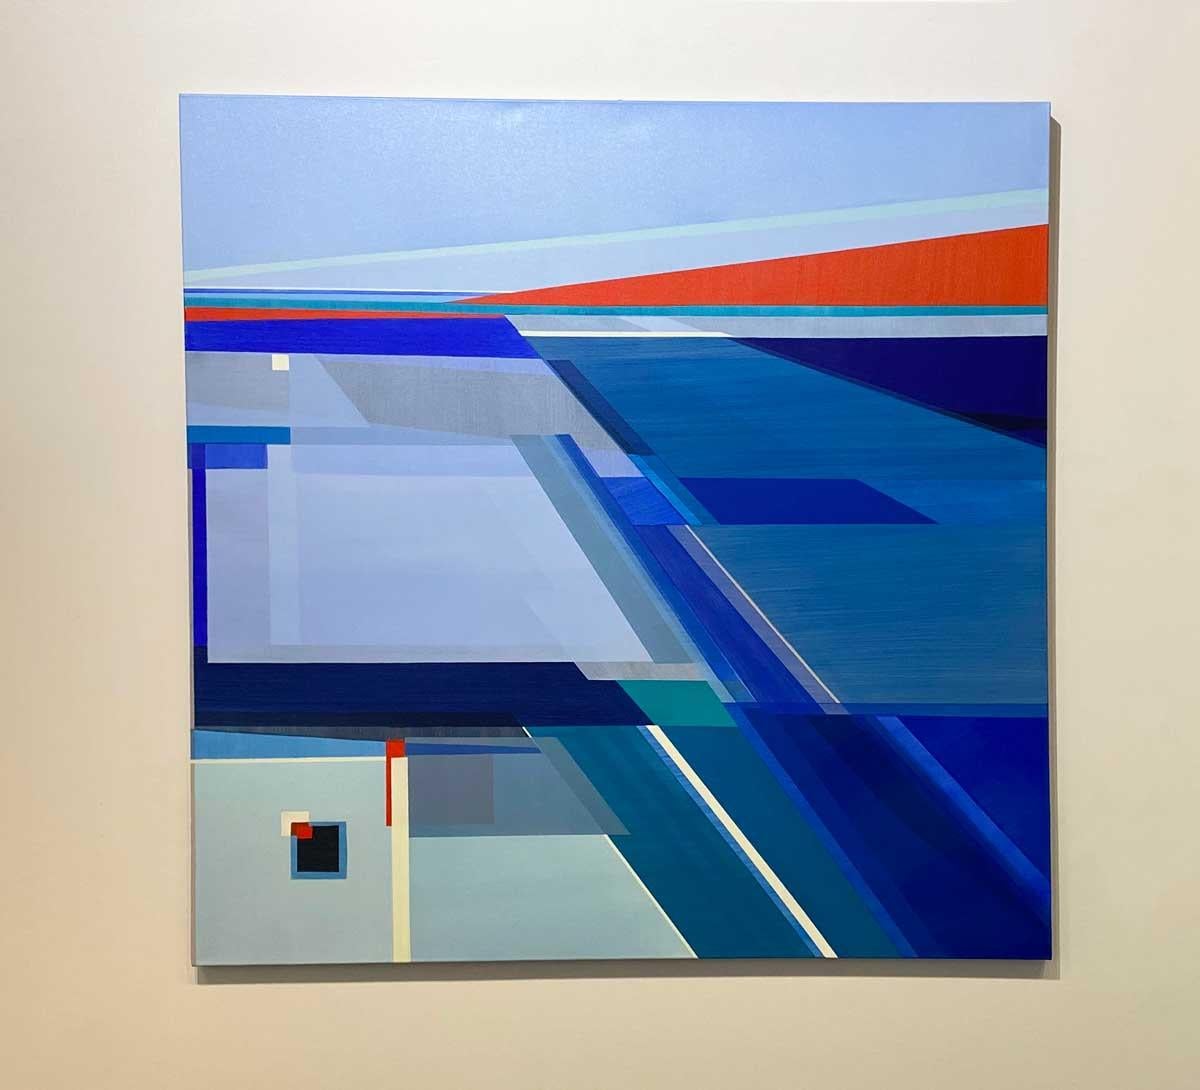 This large-scale, abstract geometric painting by Shilo Ratner measures 48